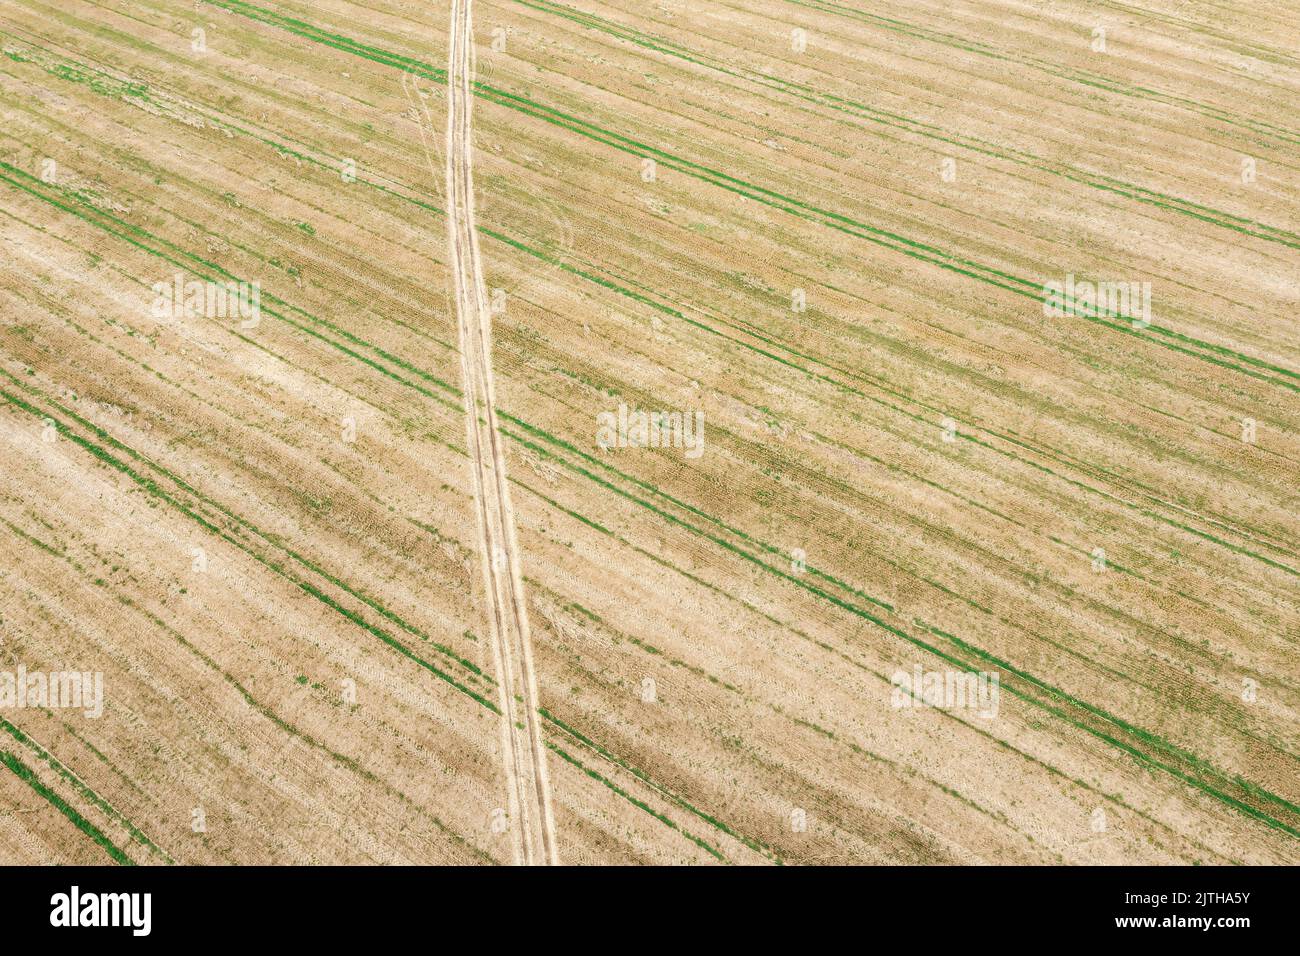 country road through wheat fields in the countryside. aerial view from flying drone. Stock Photo